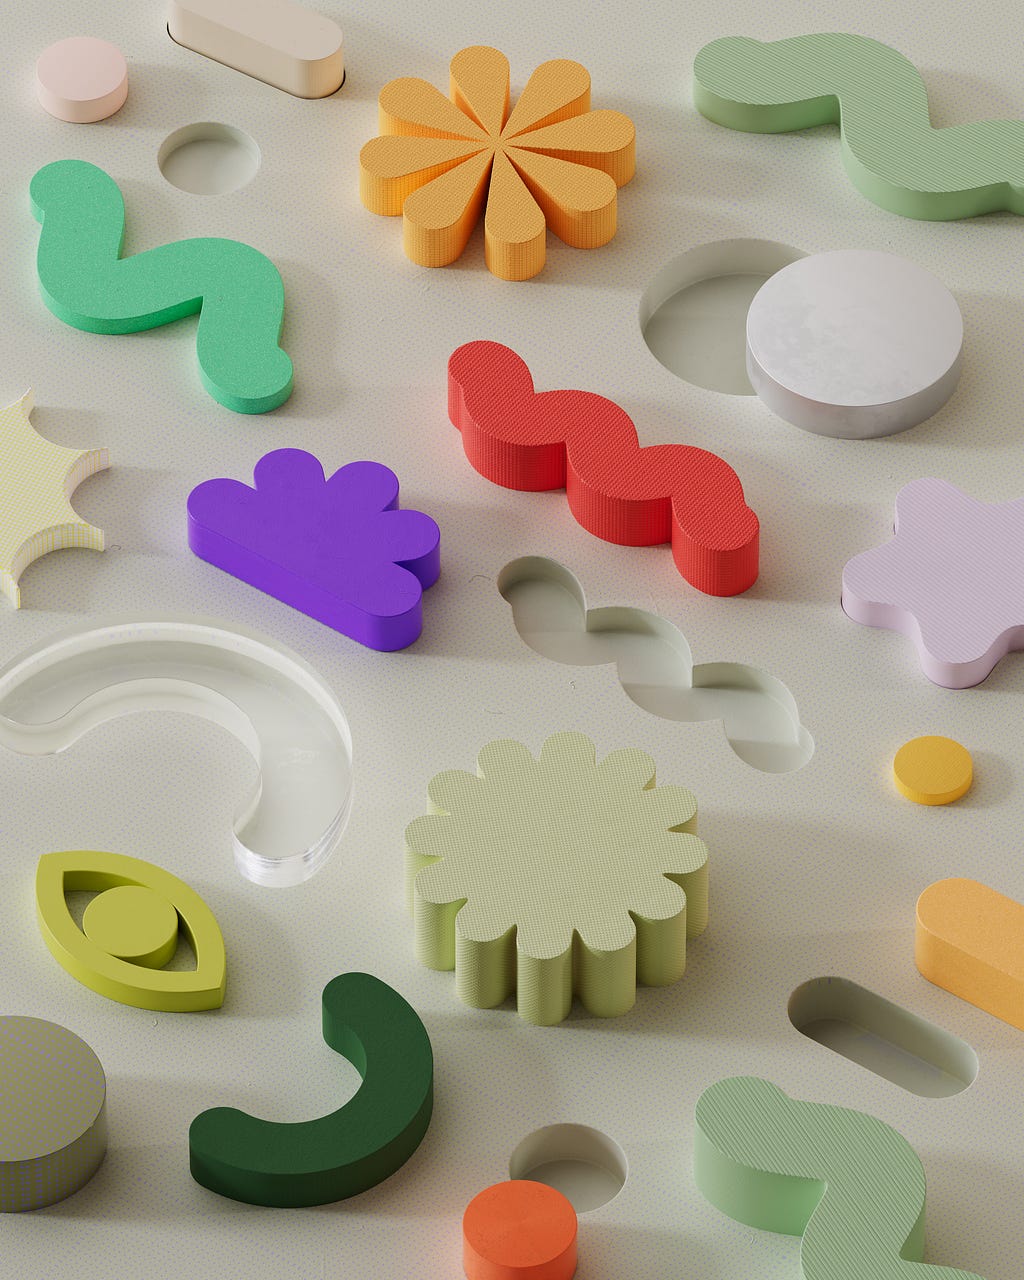 Colorful shapes being slotted into holes of the same shape, like futuristic children’s toys